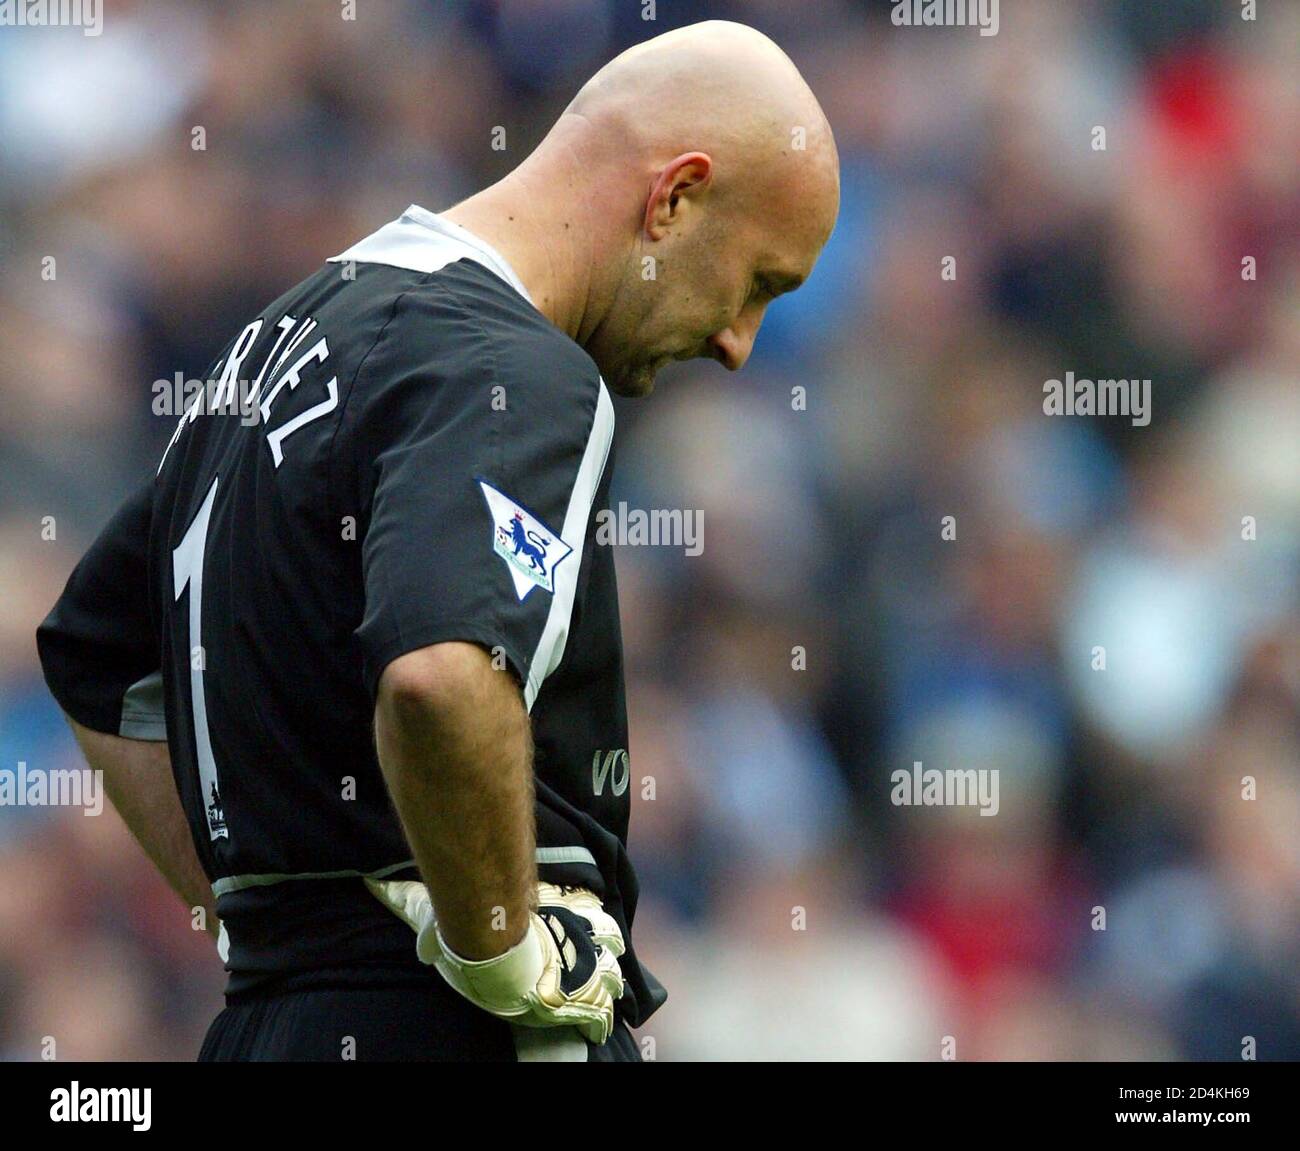 Manchester United's French goalkeeper Fabien Barthez hangs his head  following their English premier league match with [Manchester City at Maine  Road in Manchester, November 9, 2002. Manchester City won 3-1.] NO  ONLINE/INTERNET